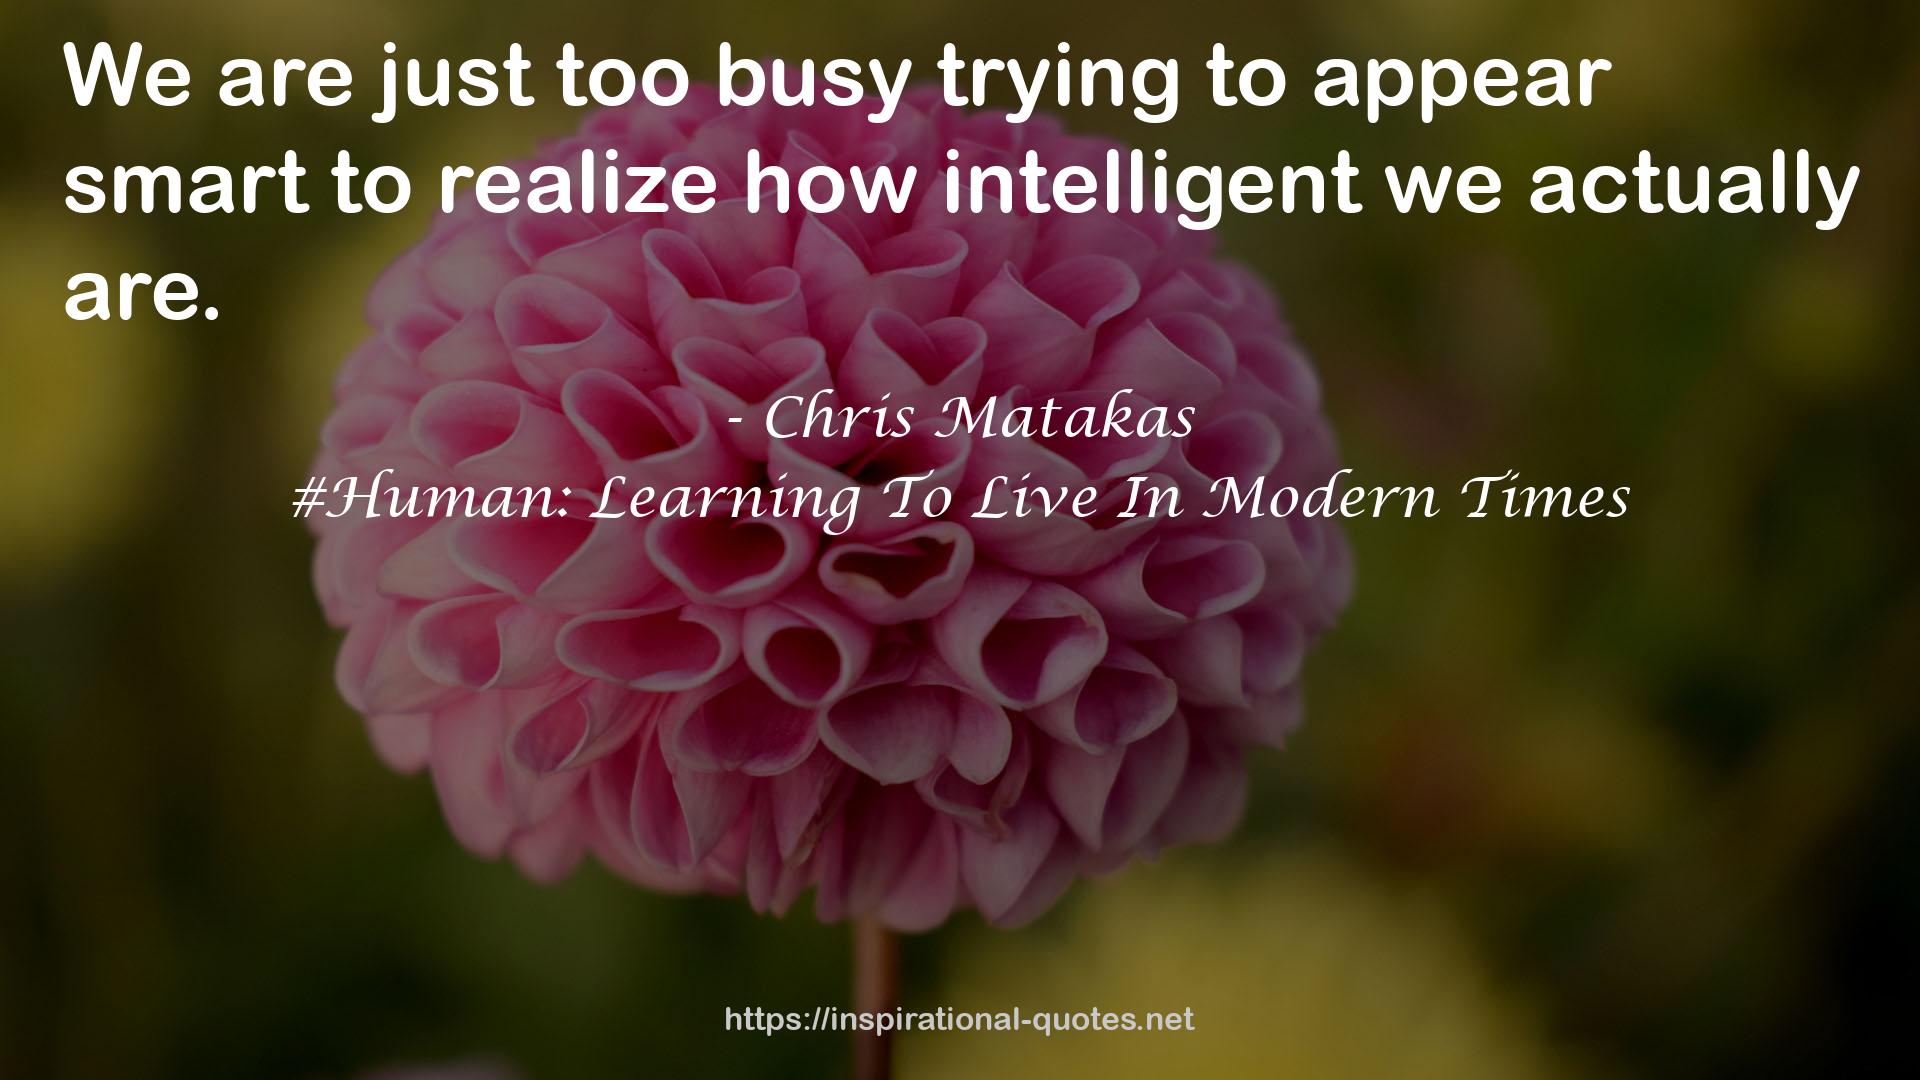 #Human: Learning To Live In Modern Times QUOTES